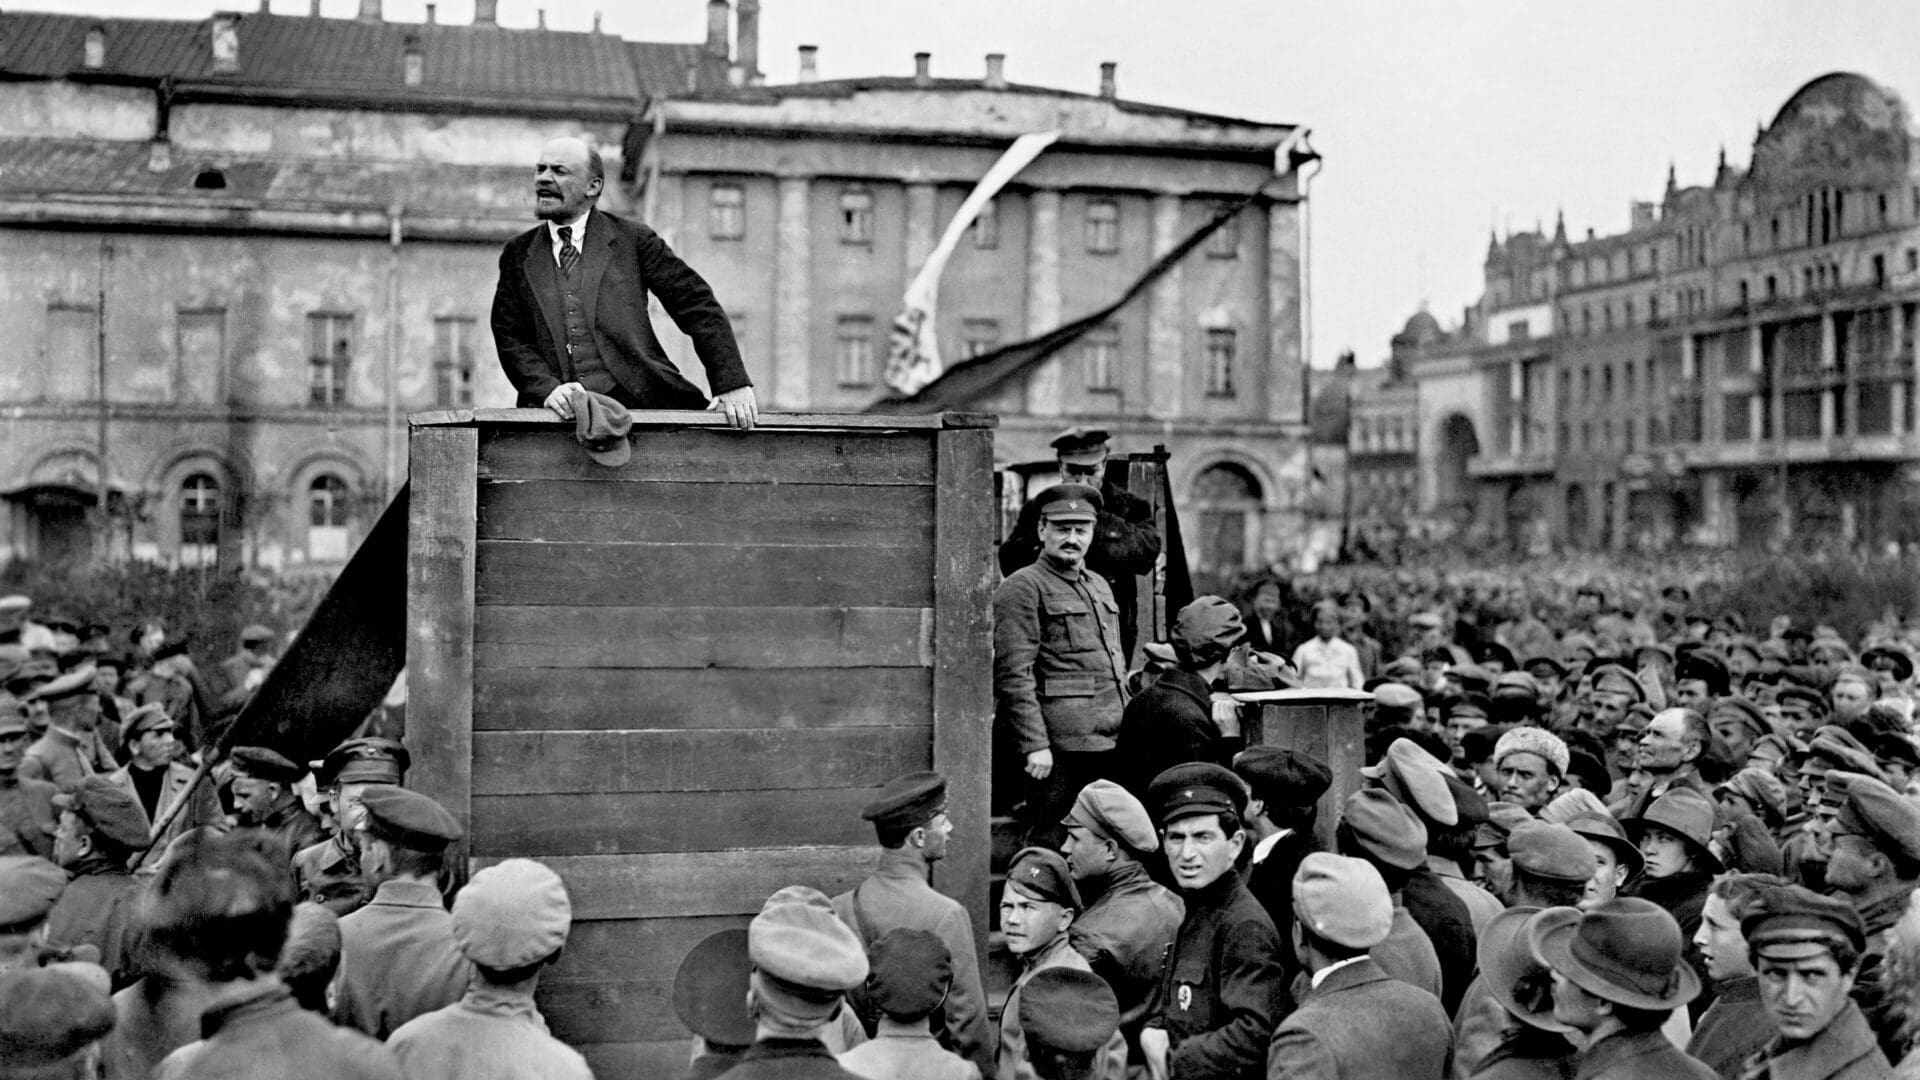 Lenin speaking in Moscow on 5 May 1920 to motivate troops to fight Poland.